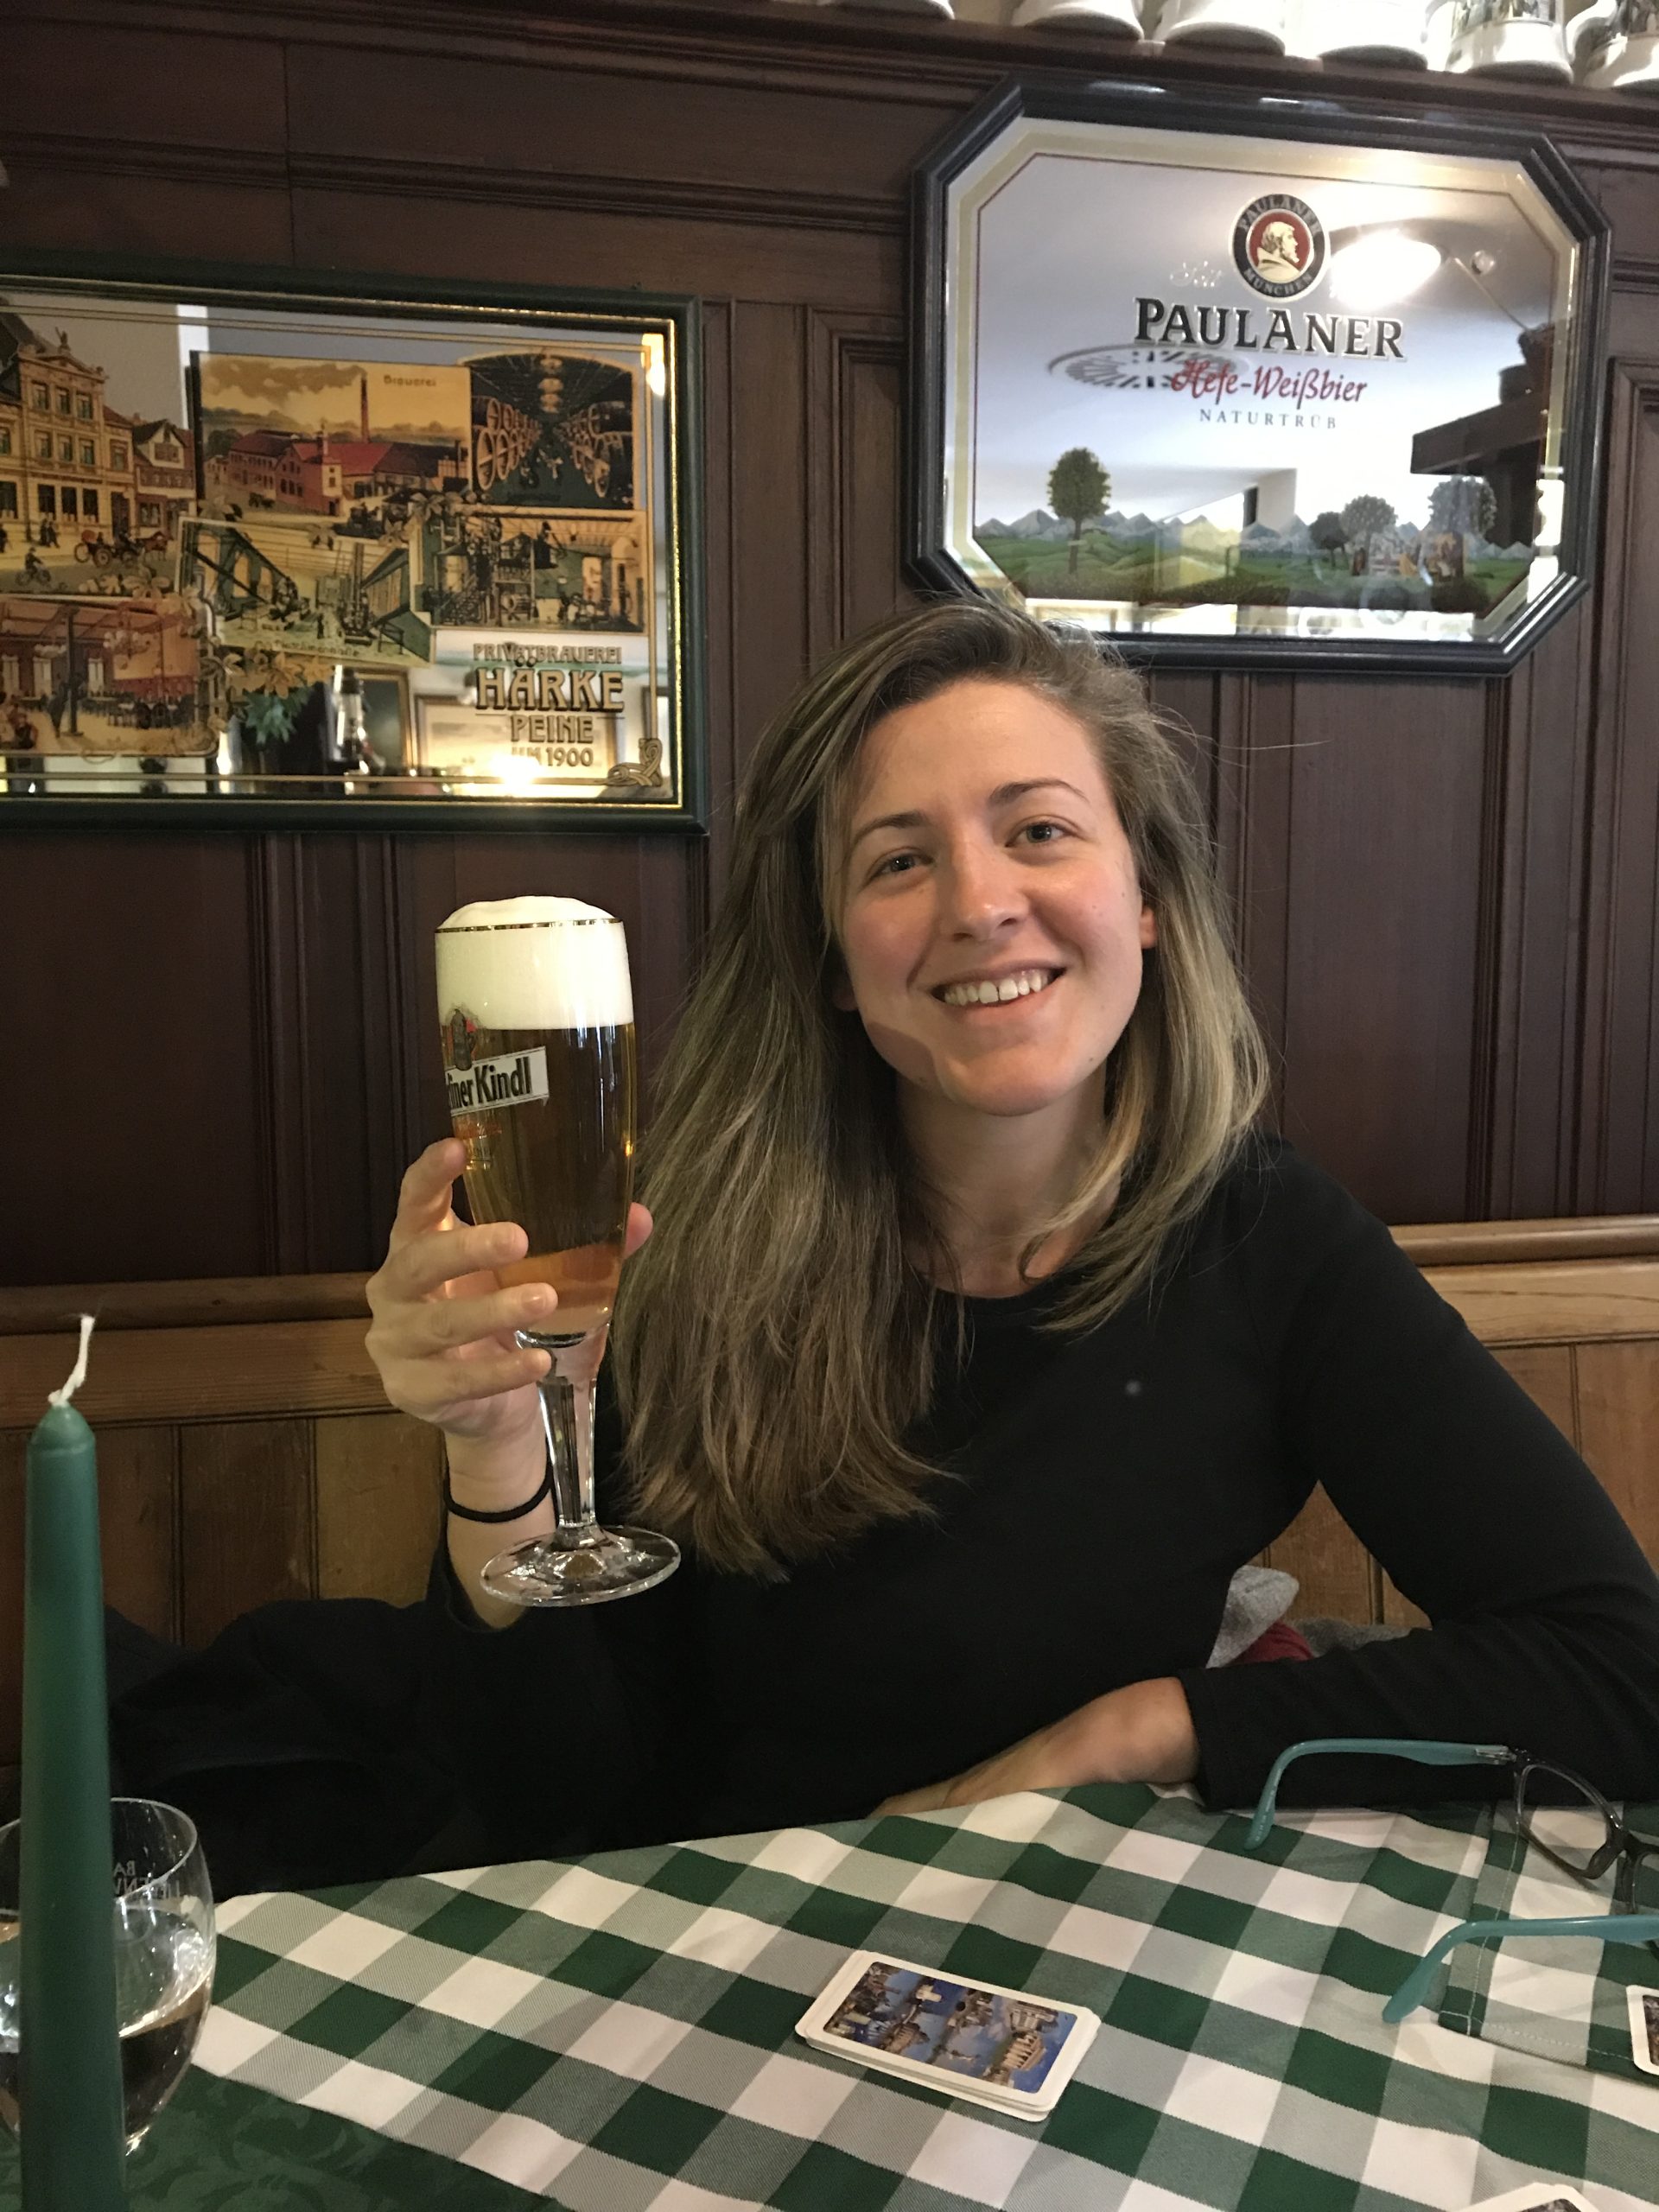 A woman sat in a bar in Germany with a been, lifting it up and smiling. She has her elbow resting on the table and she looks relaxed.